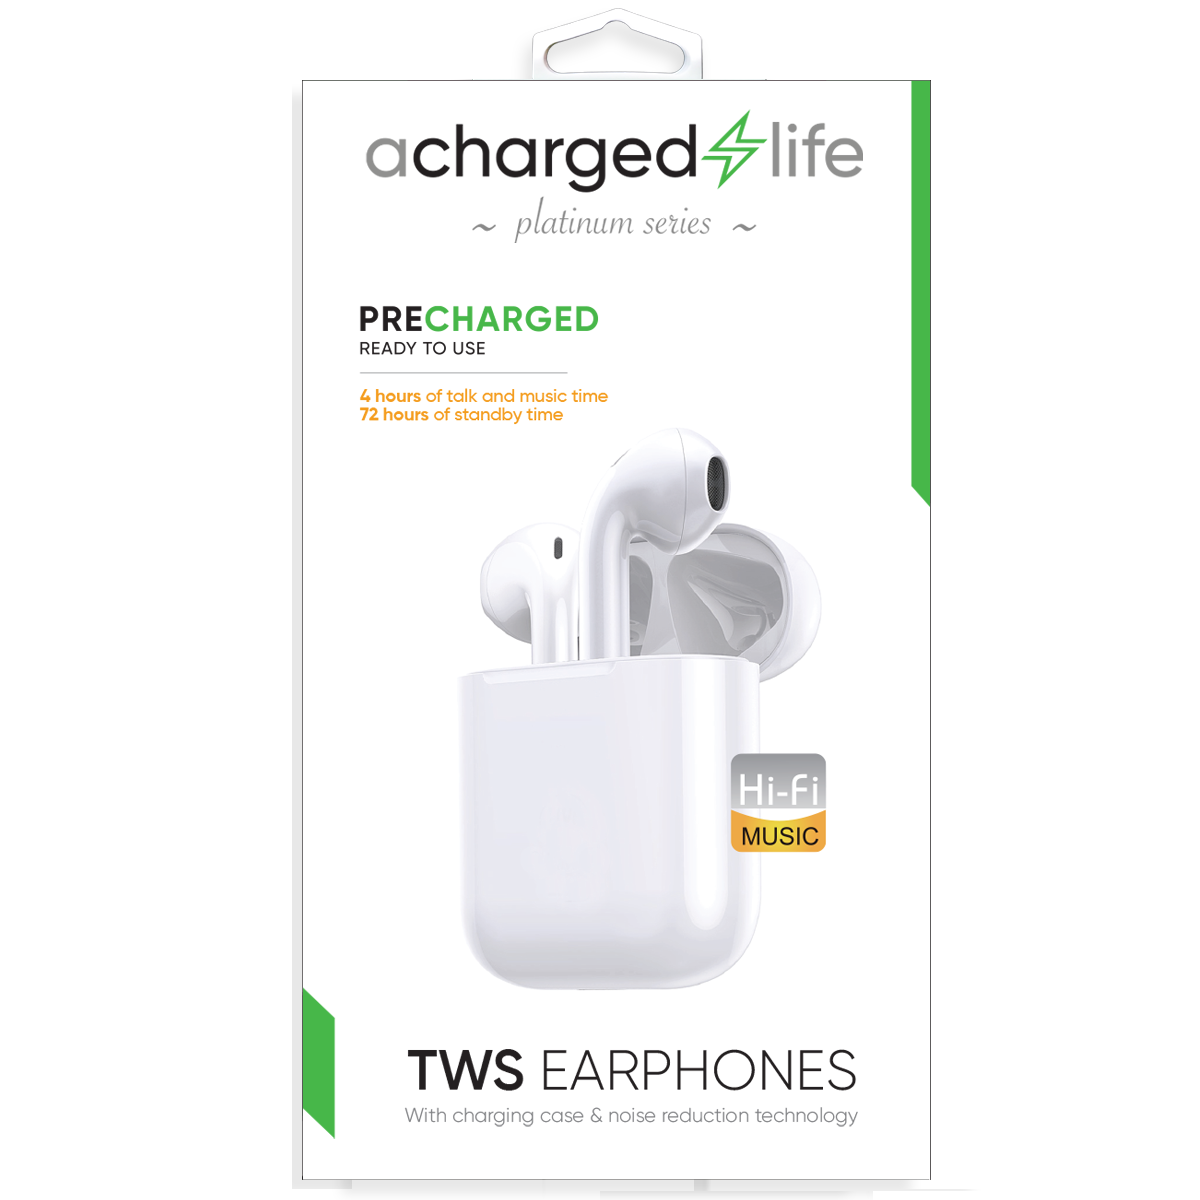 CL302 - TWS Water-Resistant Earphones 4 Hour Talk White - Pre-Charged (PLATINUM SERIES)